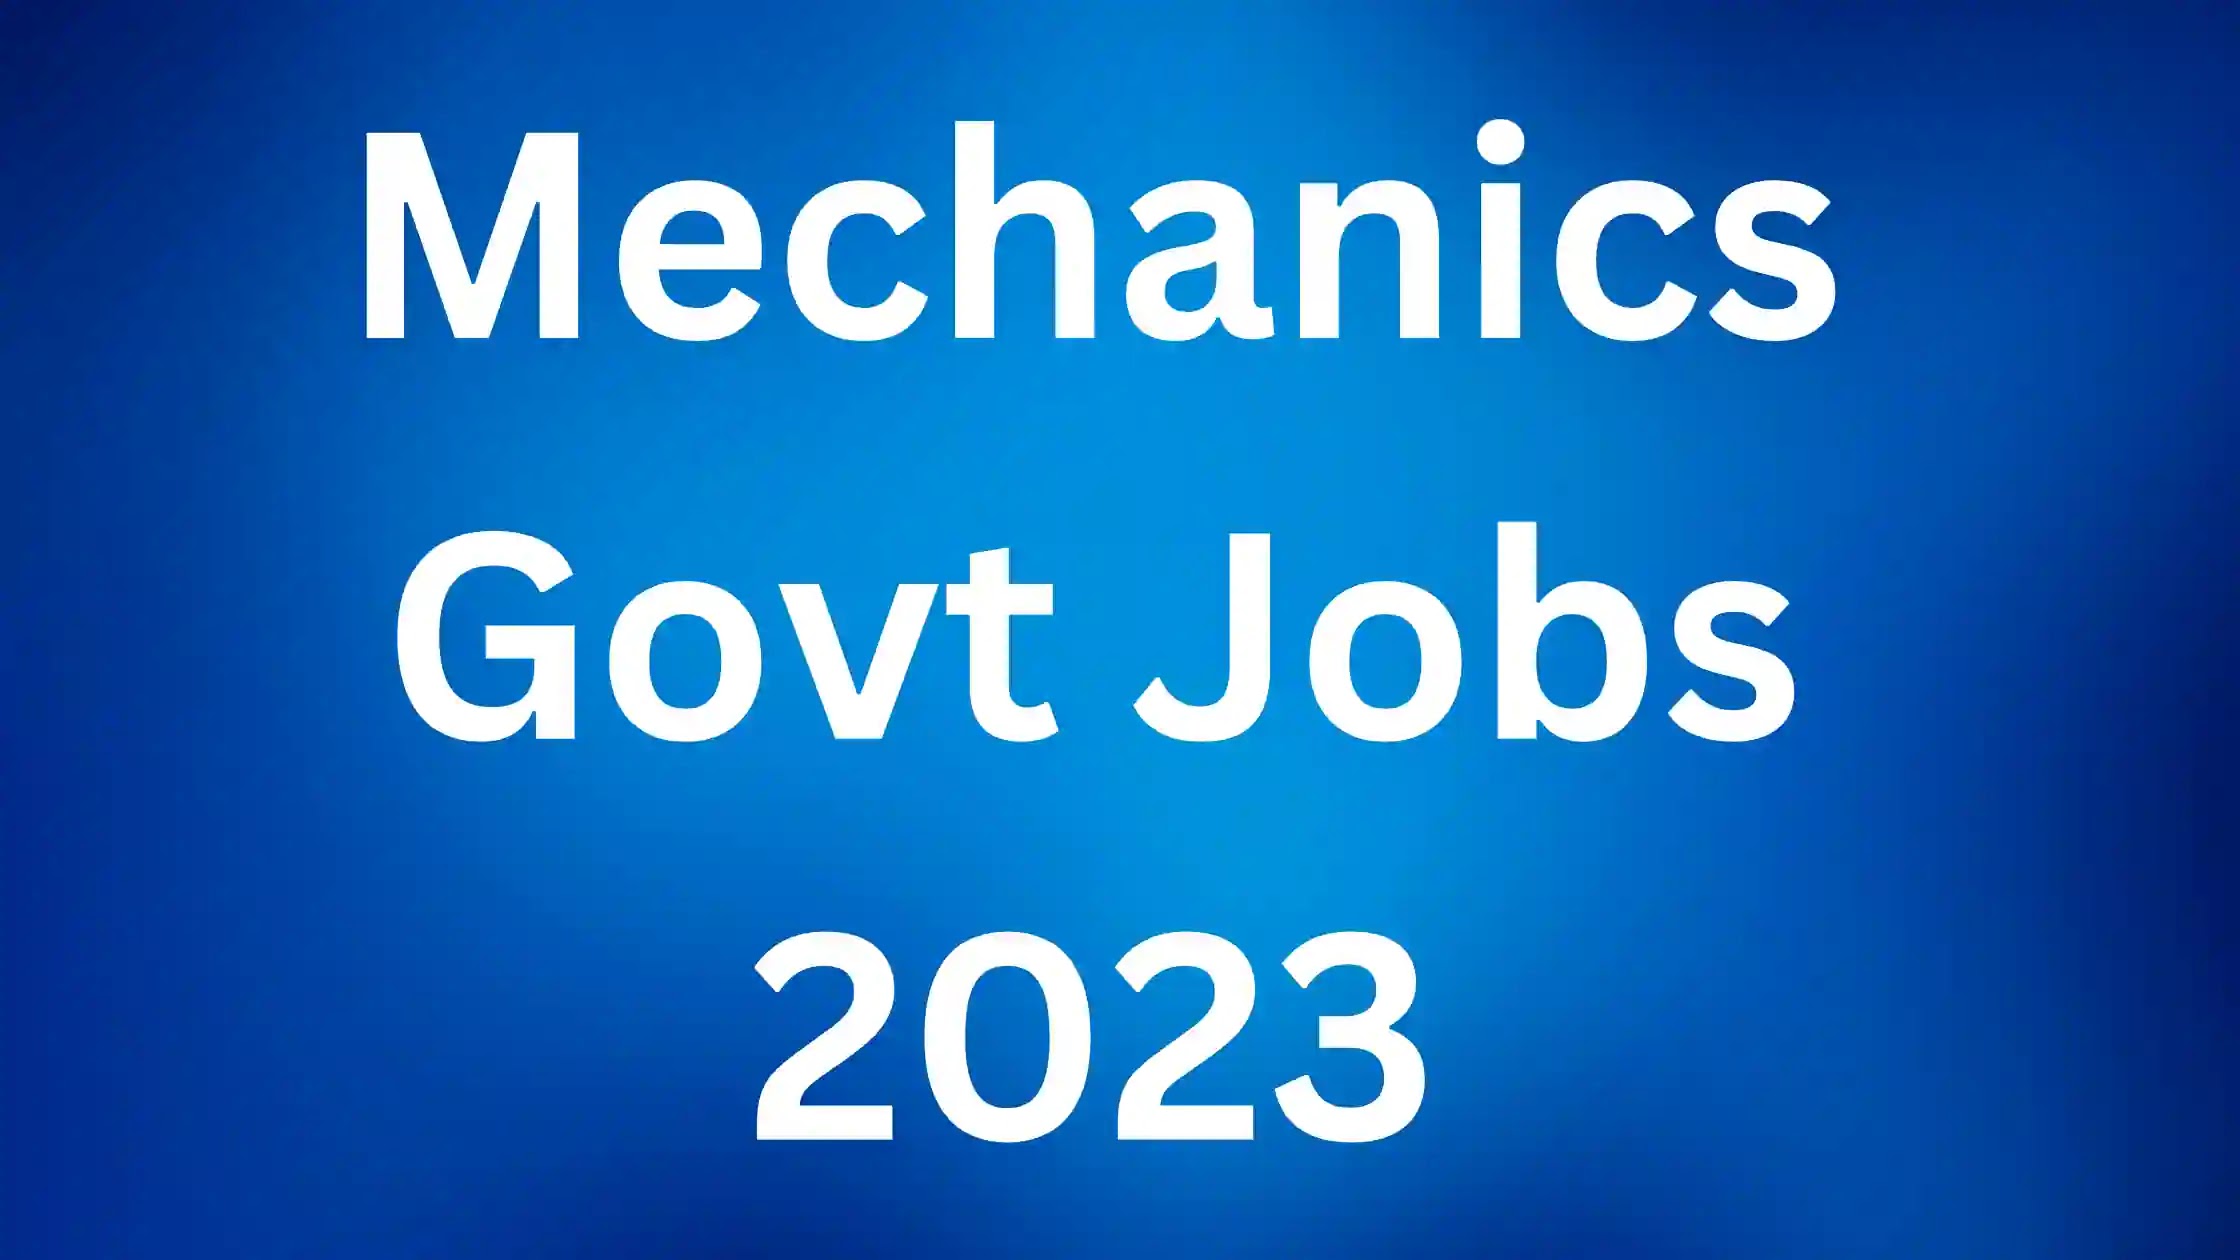 Service and General Administration Department Mechanics Govt Jobs 2023